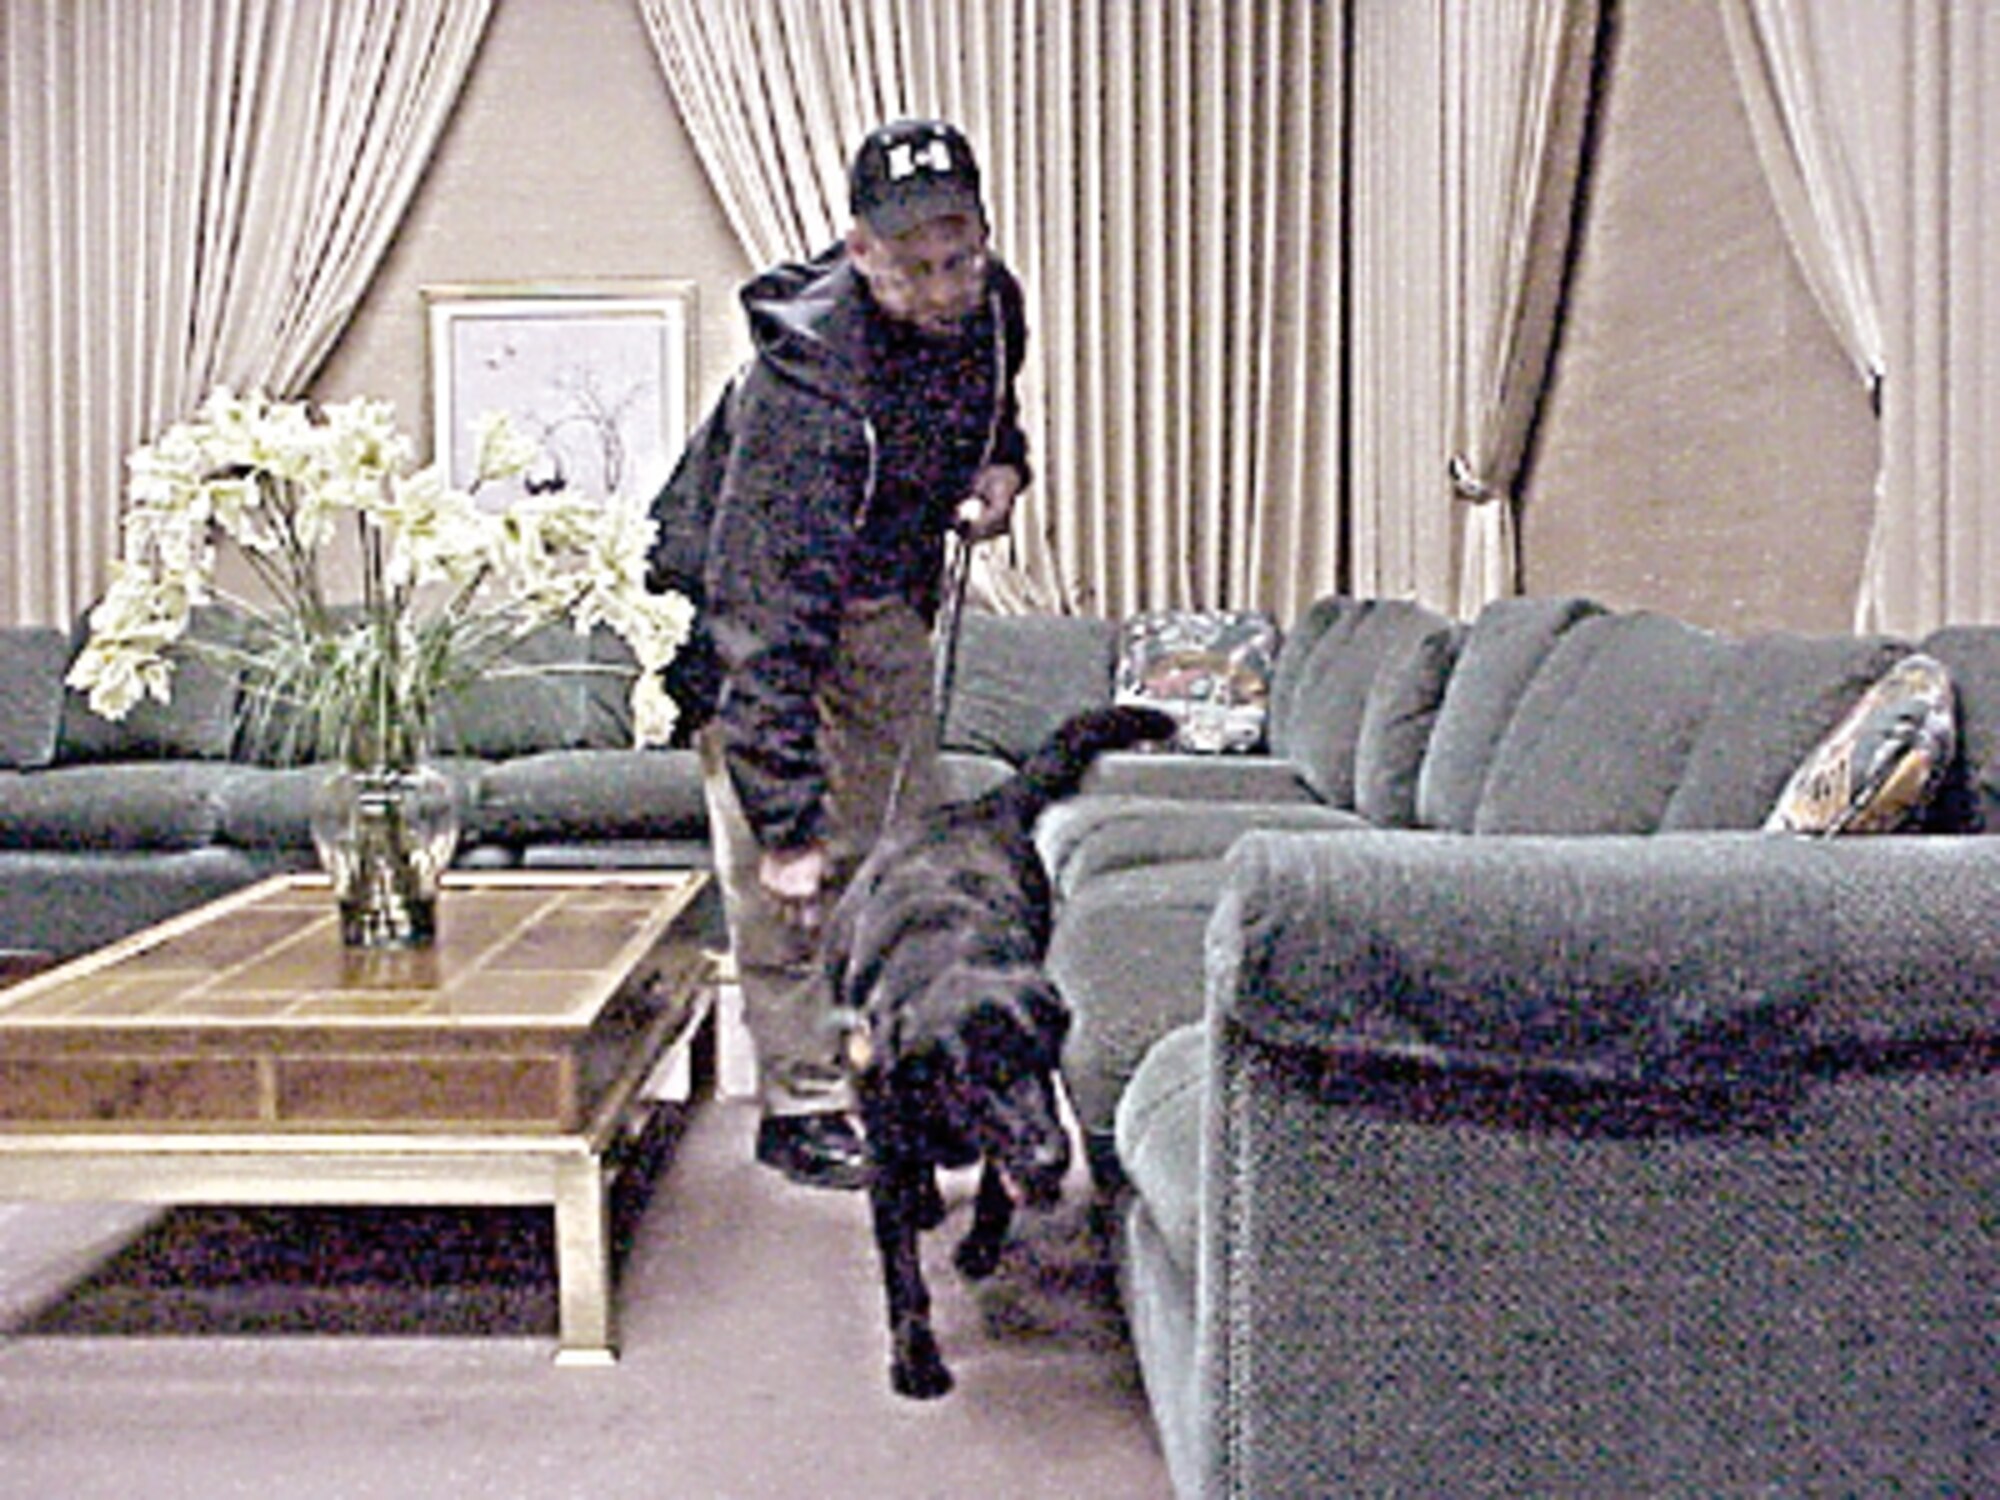 Roger Miller, a certified explosives and narcotics detection dog trainer, and his dog, Abbey, perform the initial security sweep for Utah Gov. Jon Huntsman's inauguration in January 2006.

